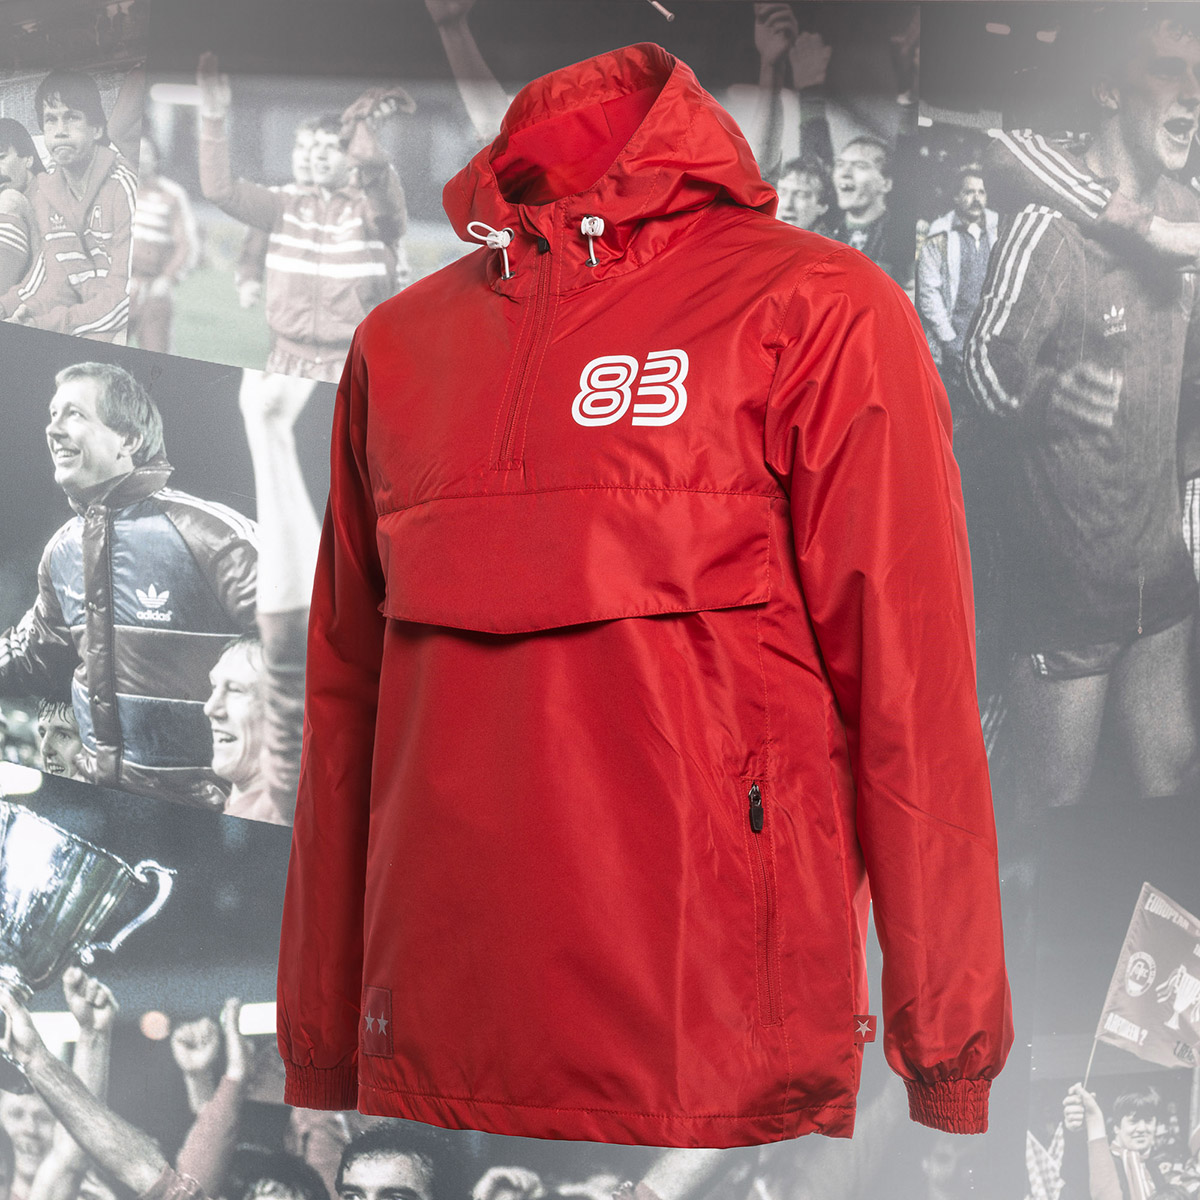 Aberdeen Commercial Photographer Aberdeen - Scott Cameron Baxter. Image shows a jacket by Aberdeen Football Club to celebrate the clubs 1983 victory over Real Madrid. A red jacket with a background of photographs from the game that day Aberdeen FC won the Cup Winners CUP UEFA.